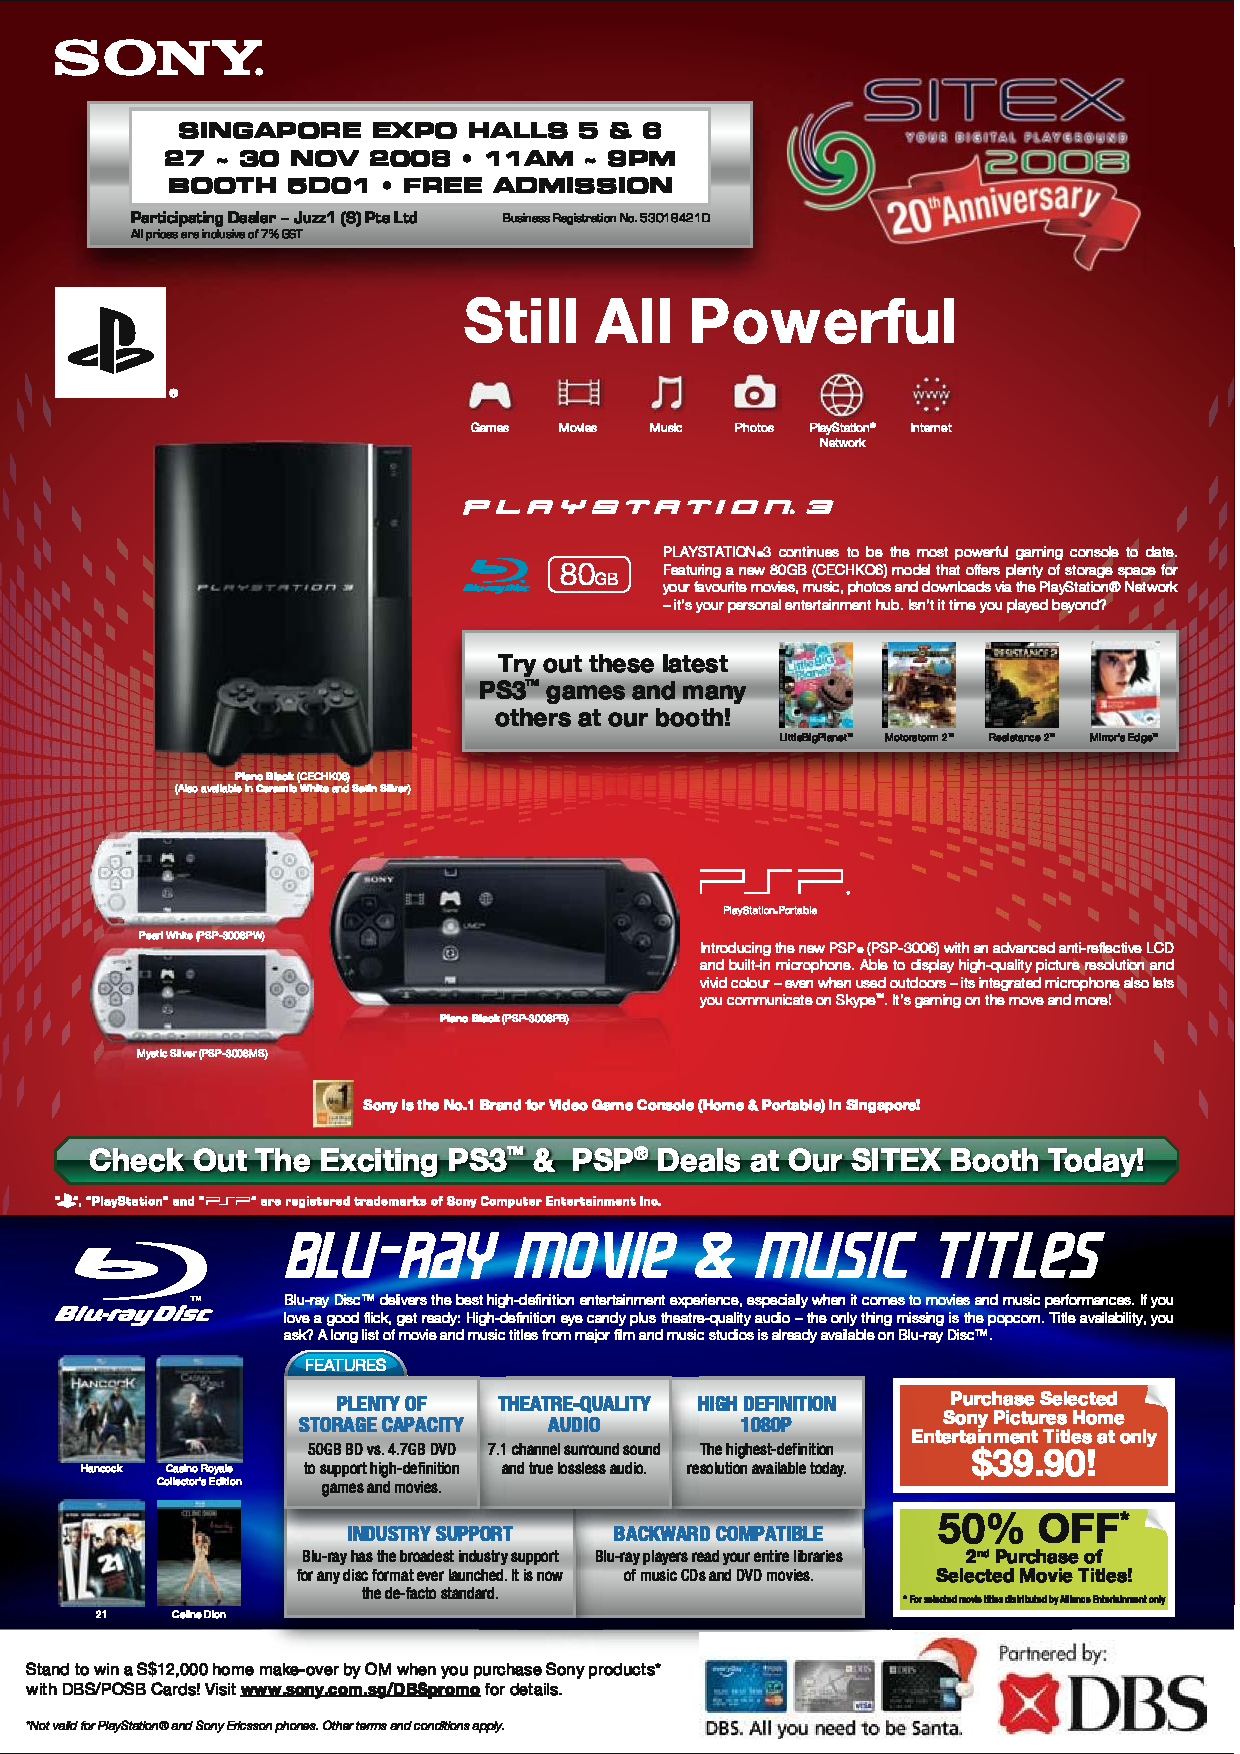 Sitex 2008 price list image brochure of Sony Playstation